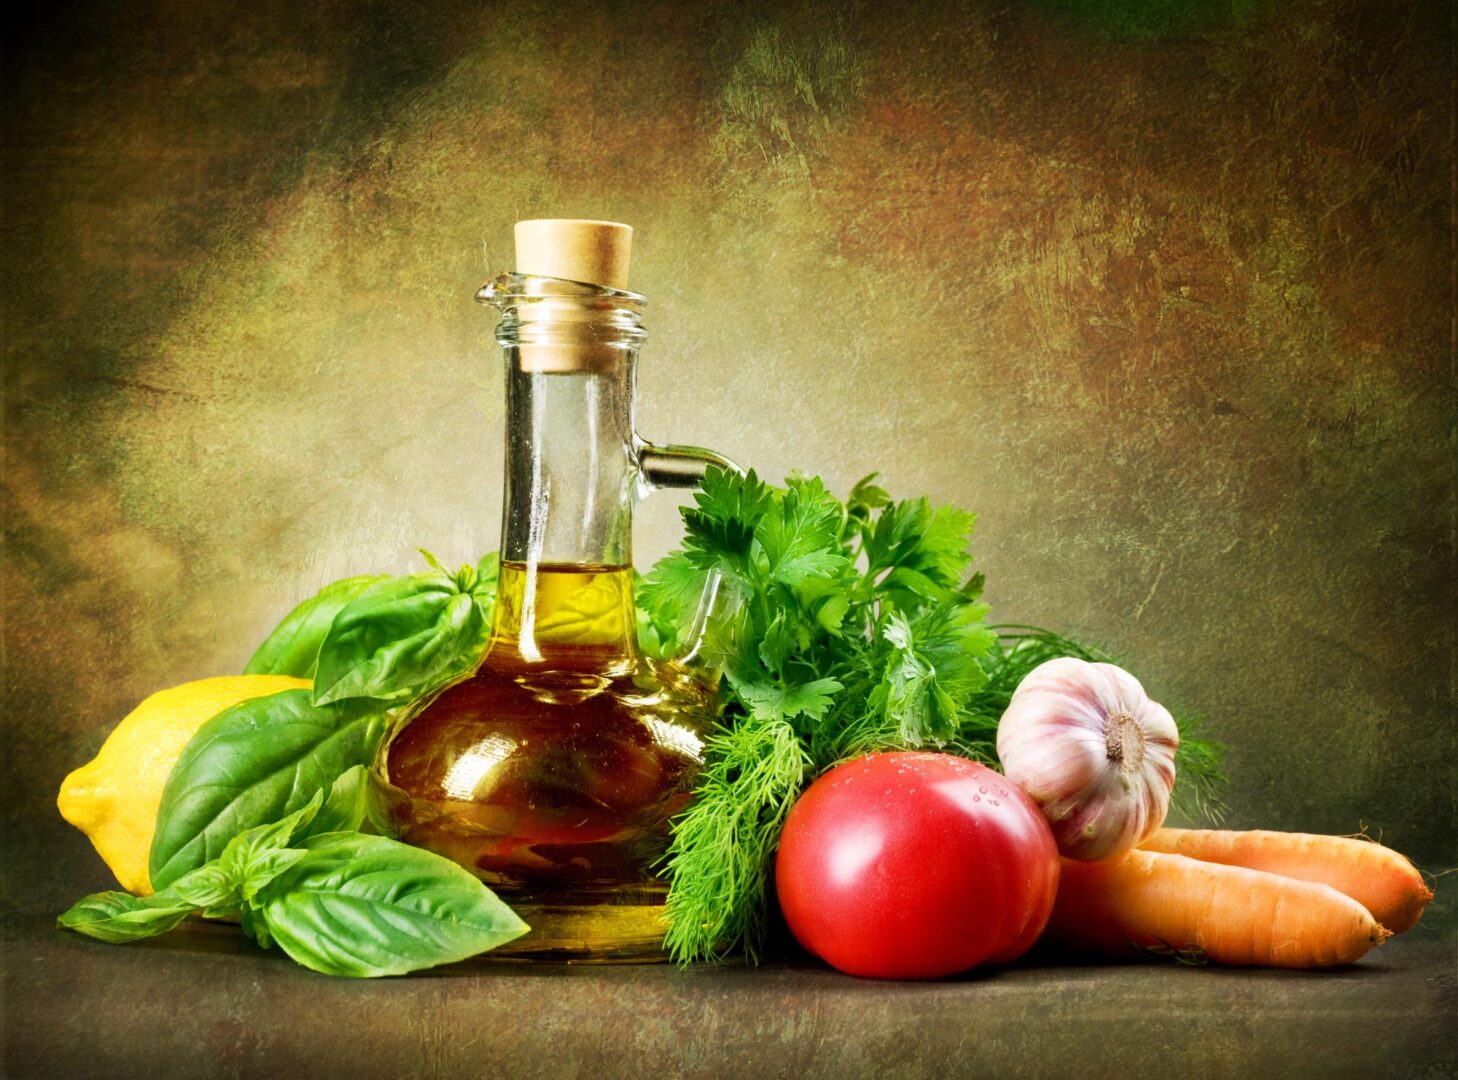 edible oil - cooking oil with vegetables around it